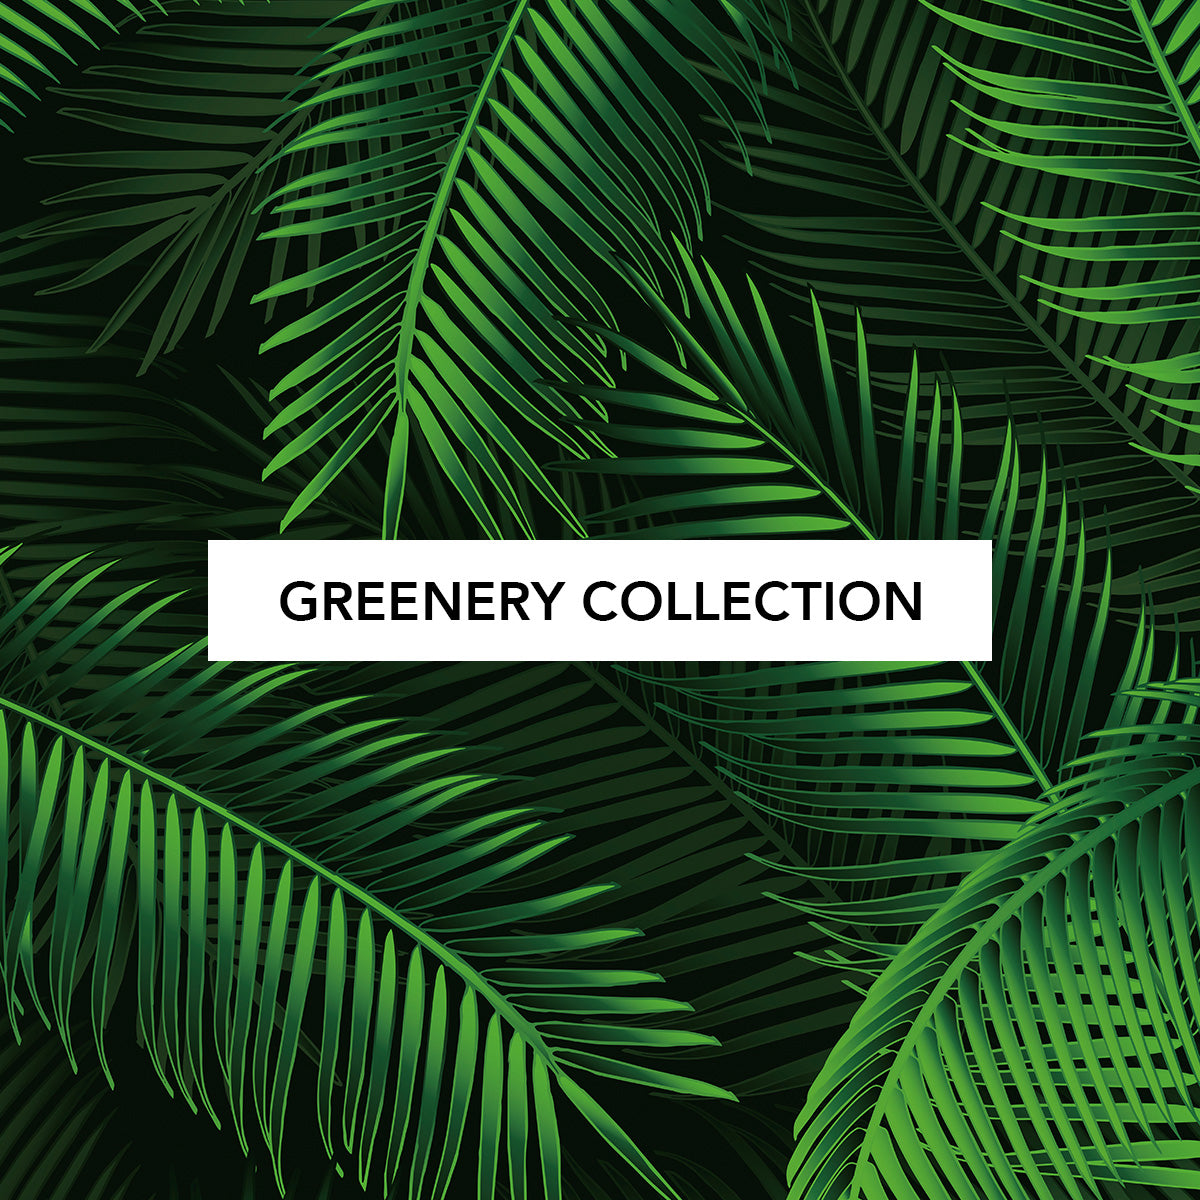 Greenery Collection